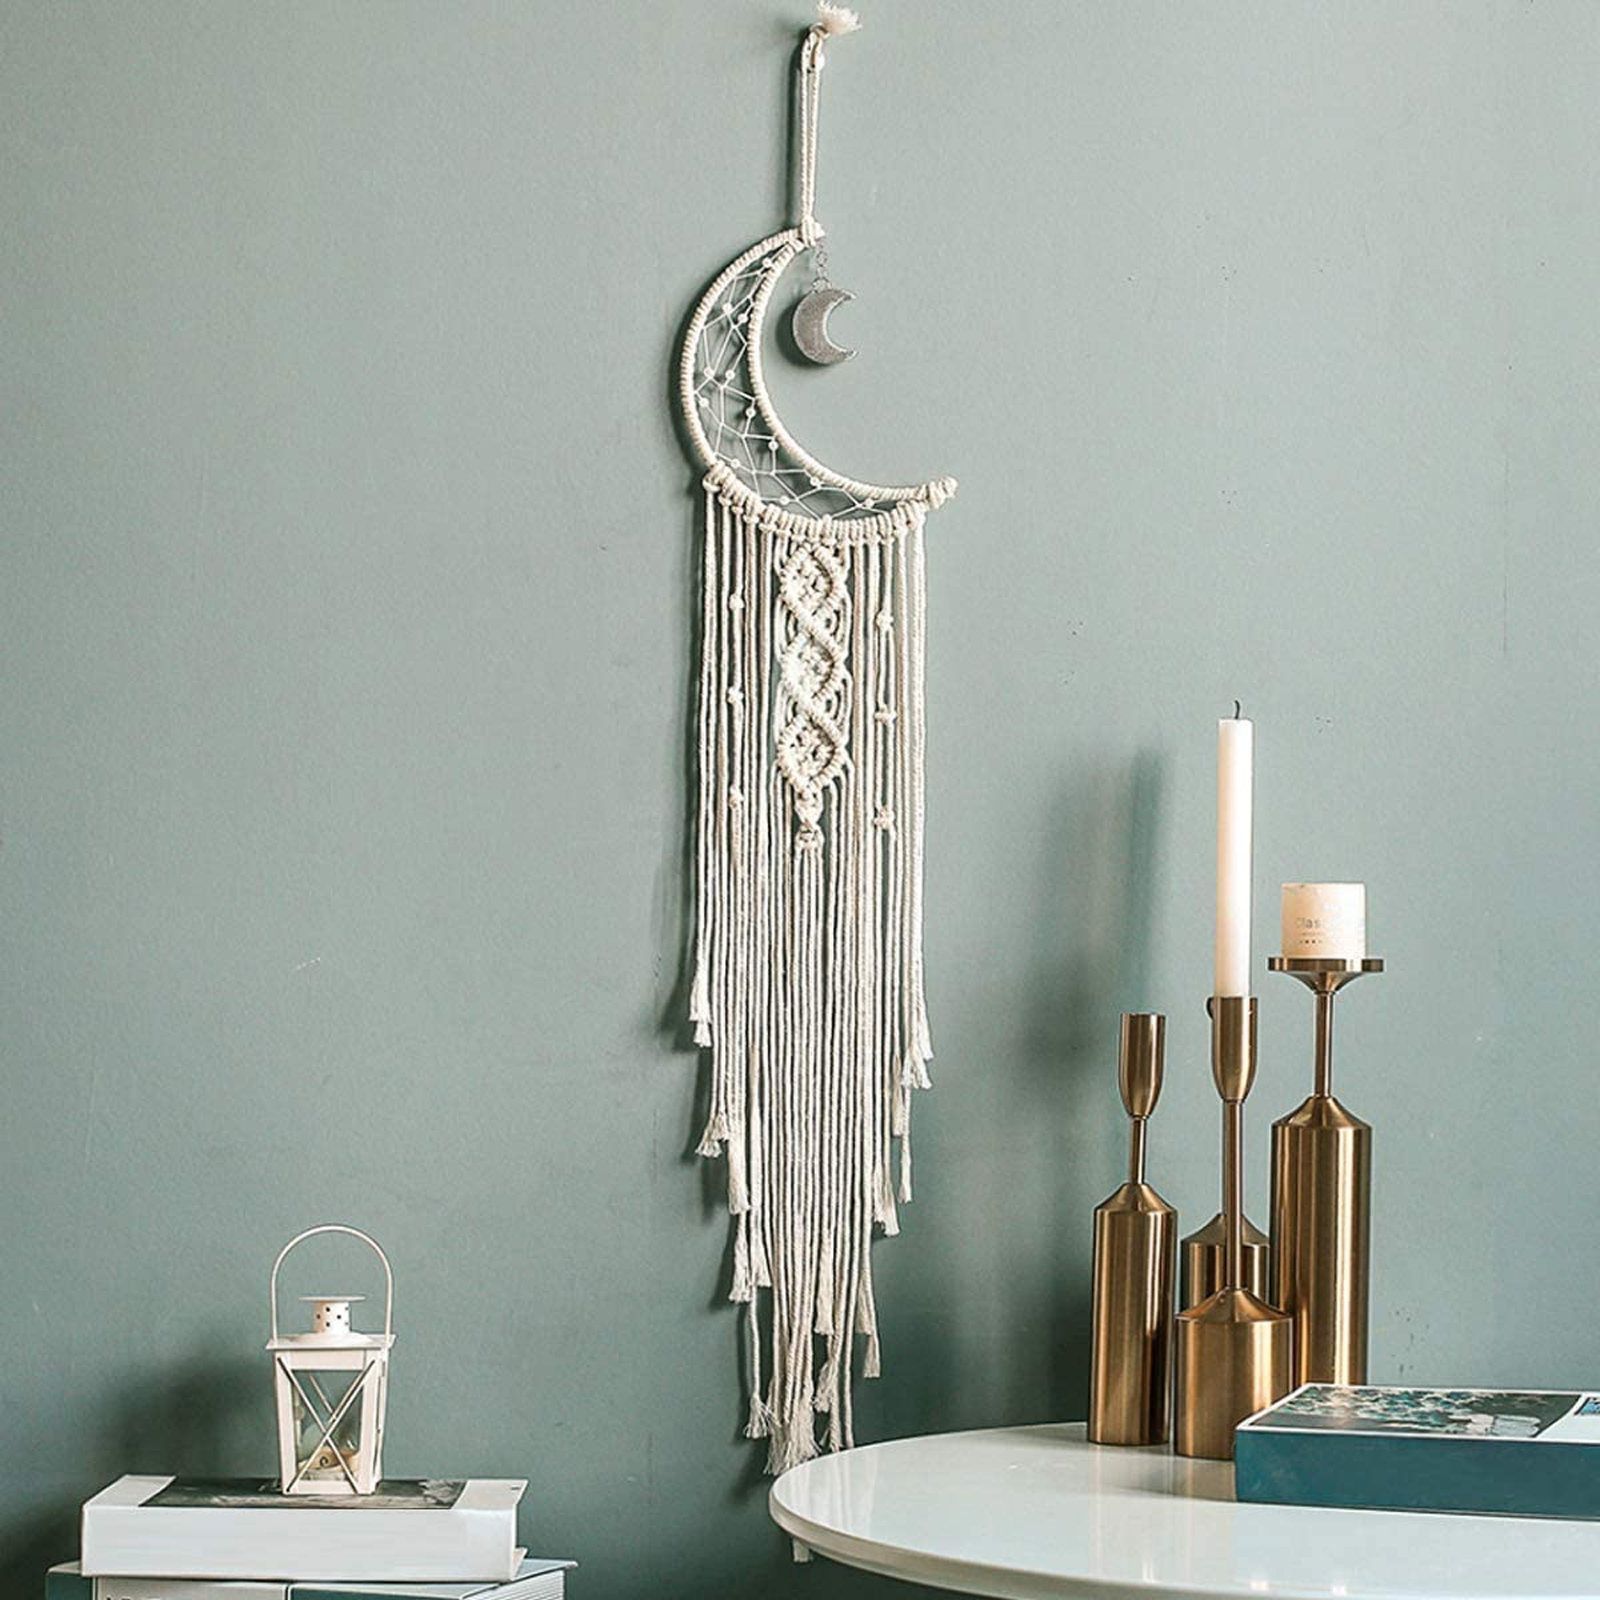 Rewarding Art Project Suit Beginner Make Your Own Boho Style Home Décor Wall Hanging Macramé Feather DIY Craft Kit